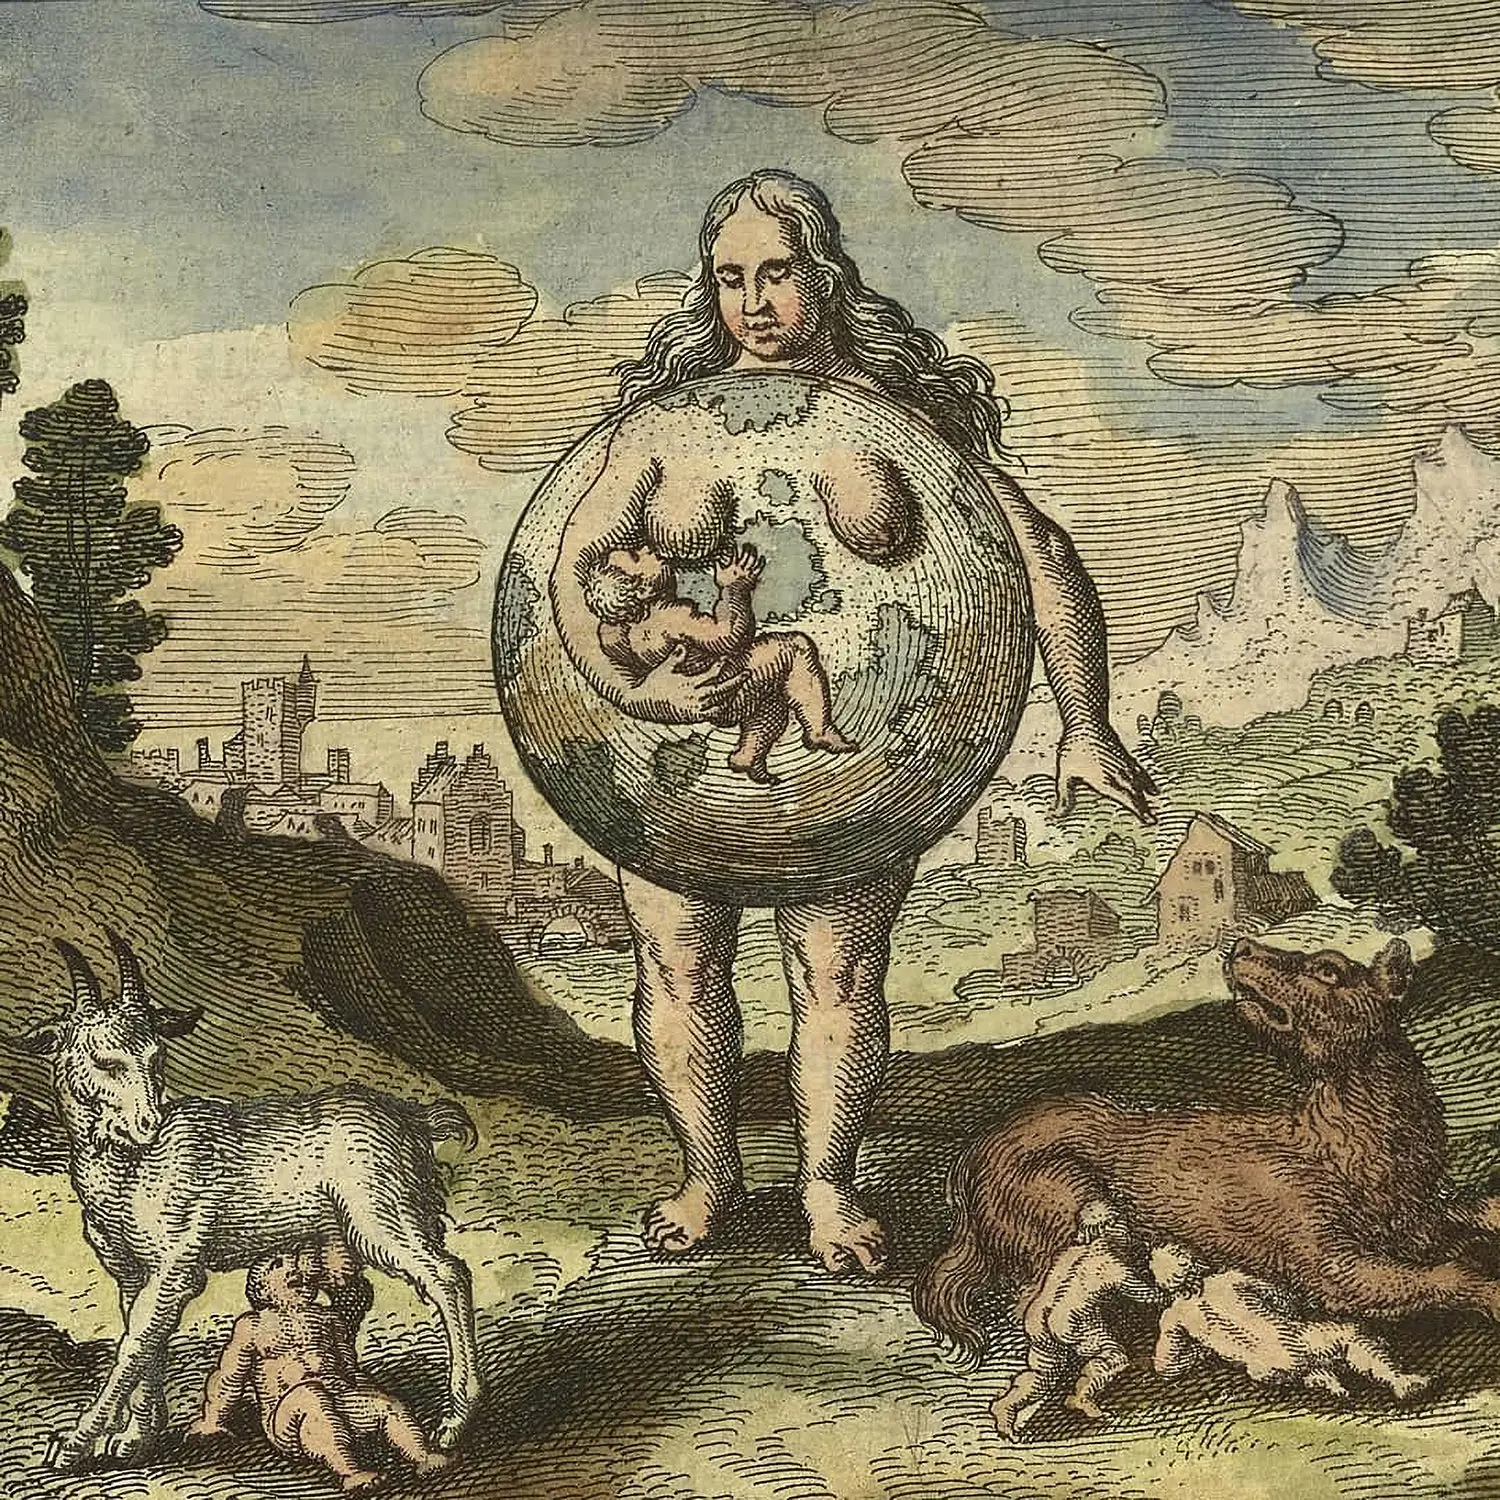 Mother Earth is depicted as a woman with long gray hair and her torso the large sphere of the Earth. She is carrying a baby, which is feeding from her breast. On the ground near her, babies are feeding on a goat and a dog.